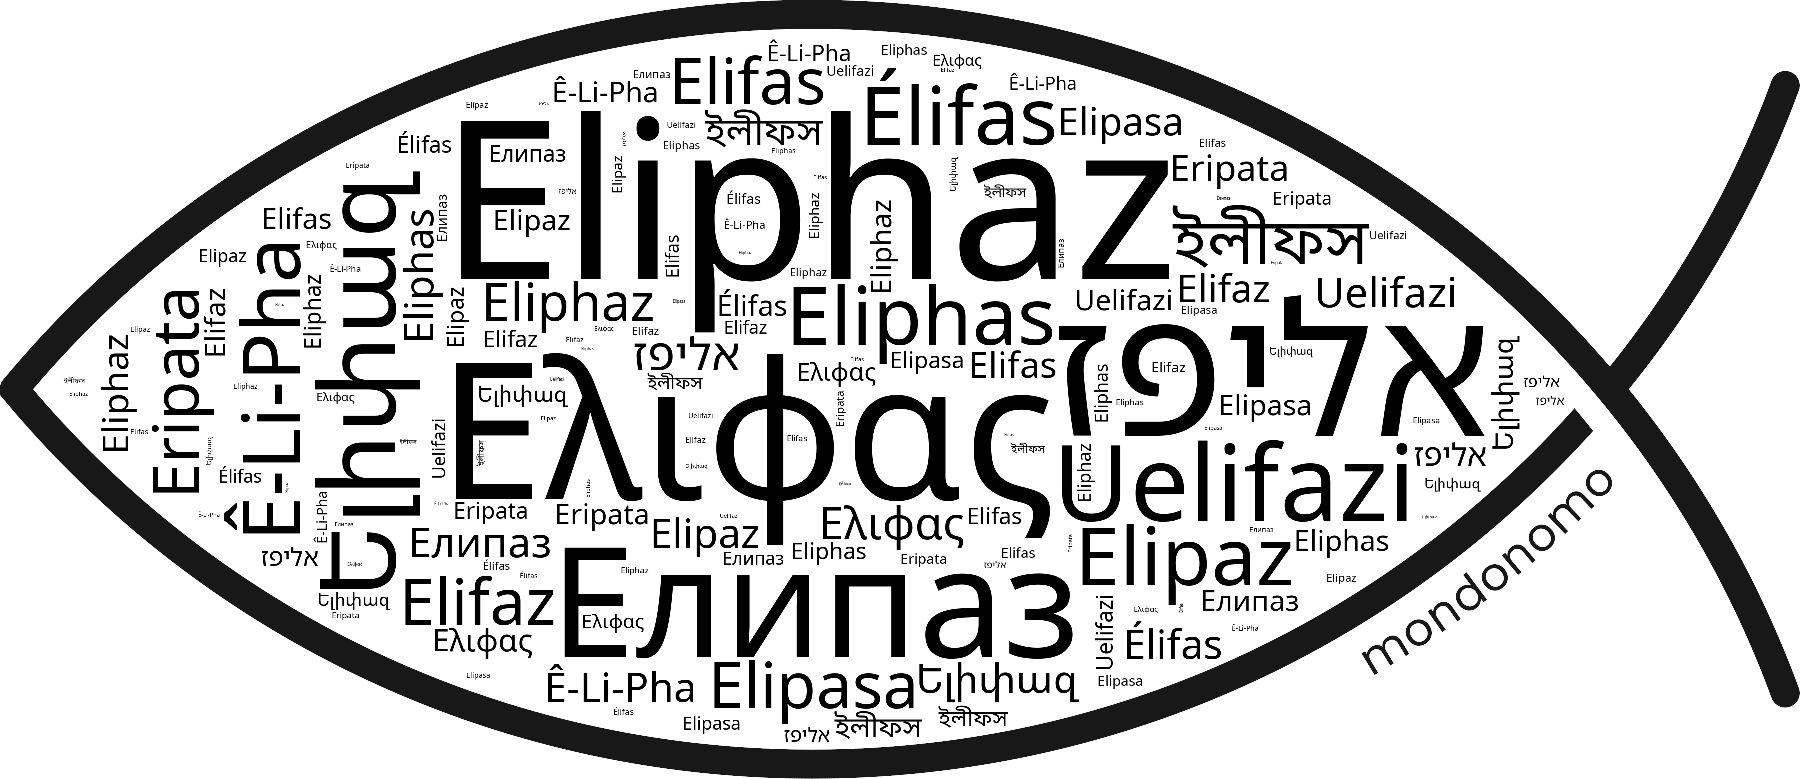 Name Eliphaz in the world's Bibles